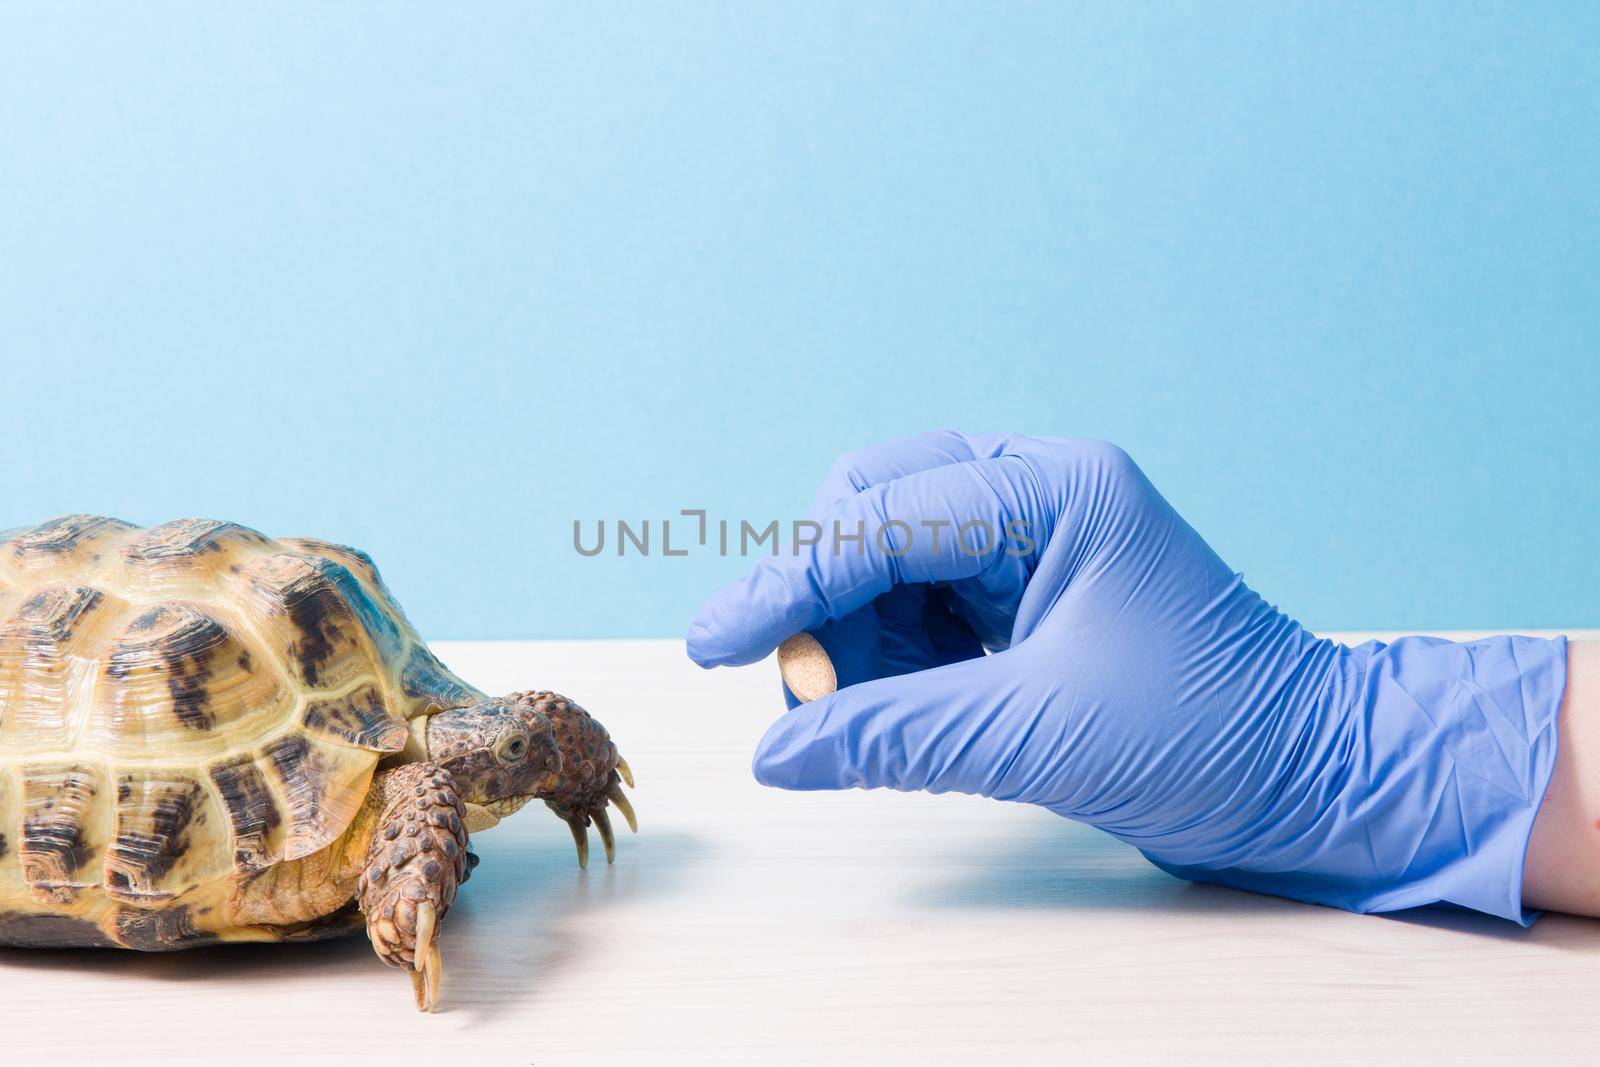 herpetologist veterinarian gives pill medicine or vitamins to land tortoise, hand in rubber glove with pill for treating turtles, blue background, copy place